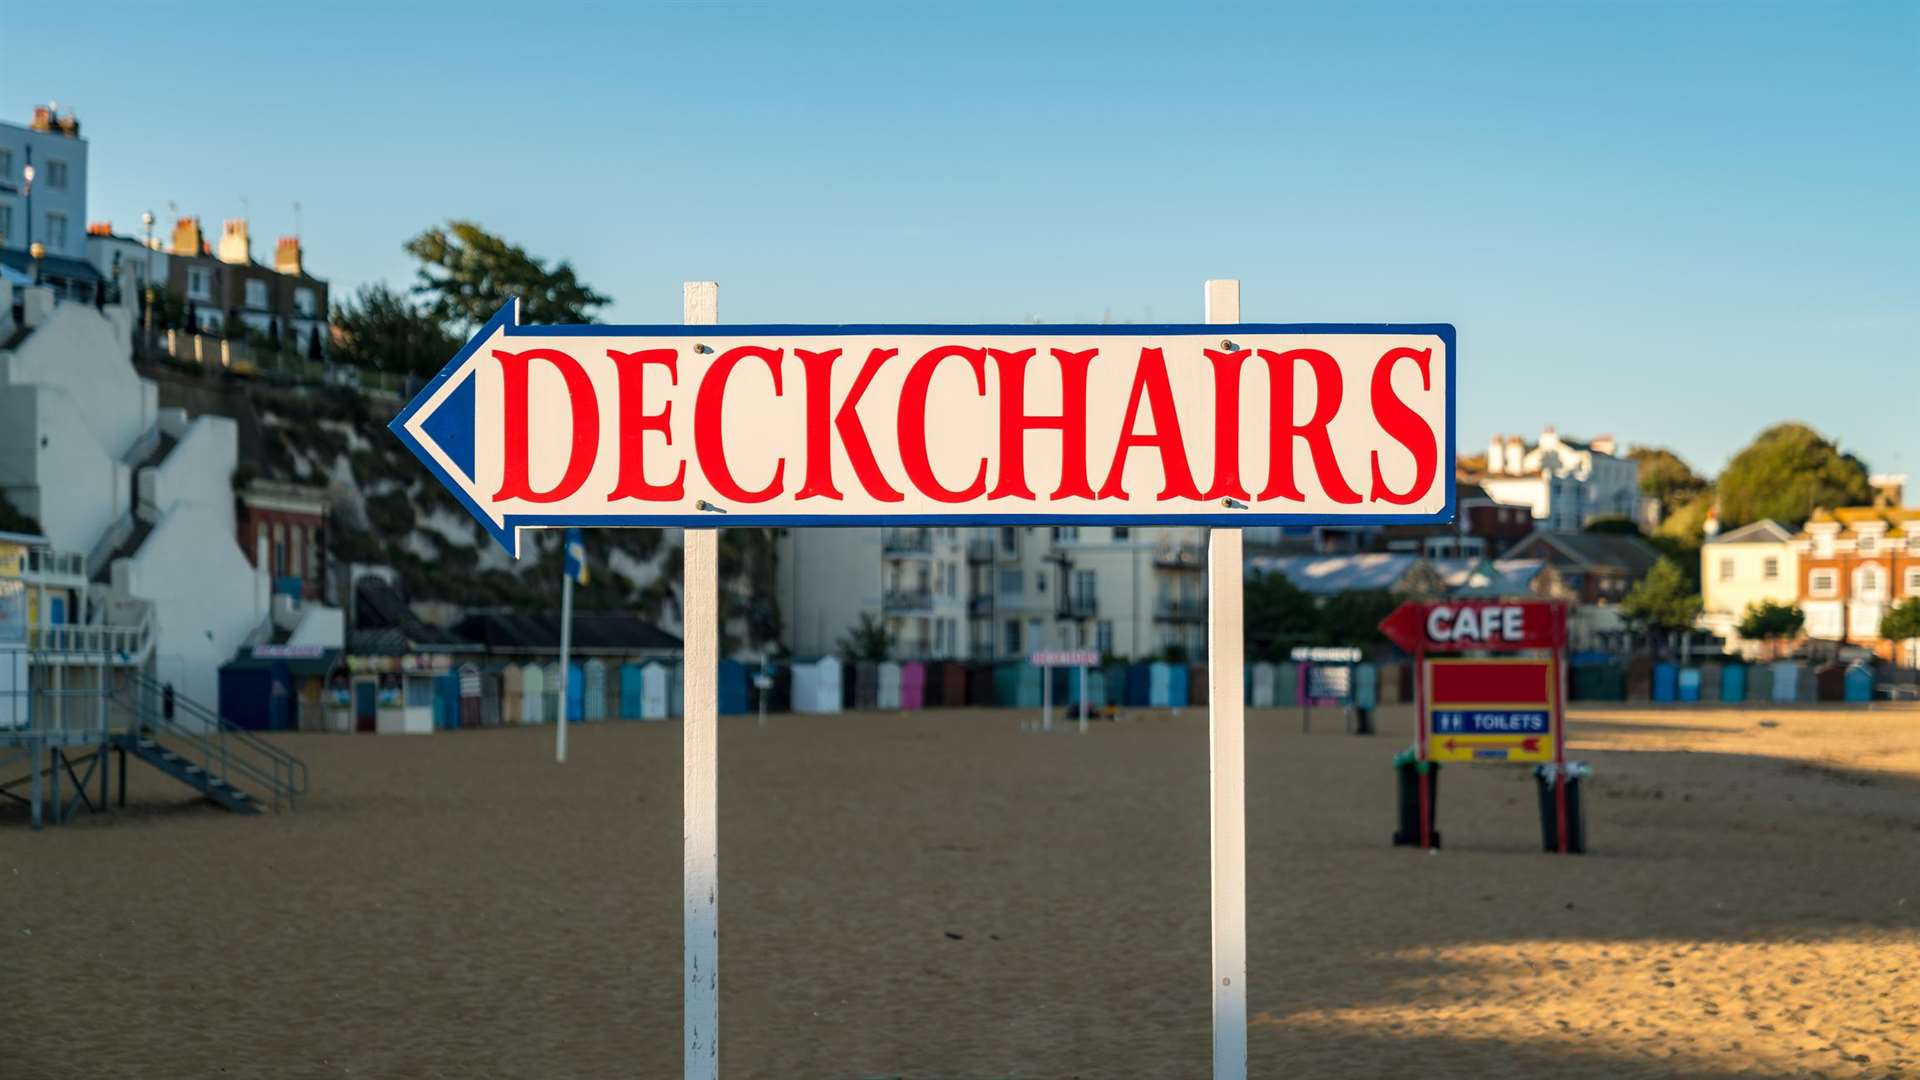 Deckchairs at Viking Bay in Broadstairs